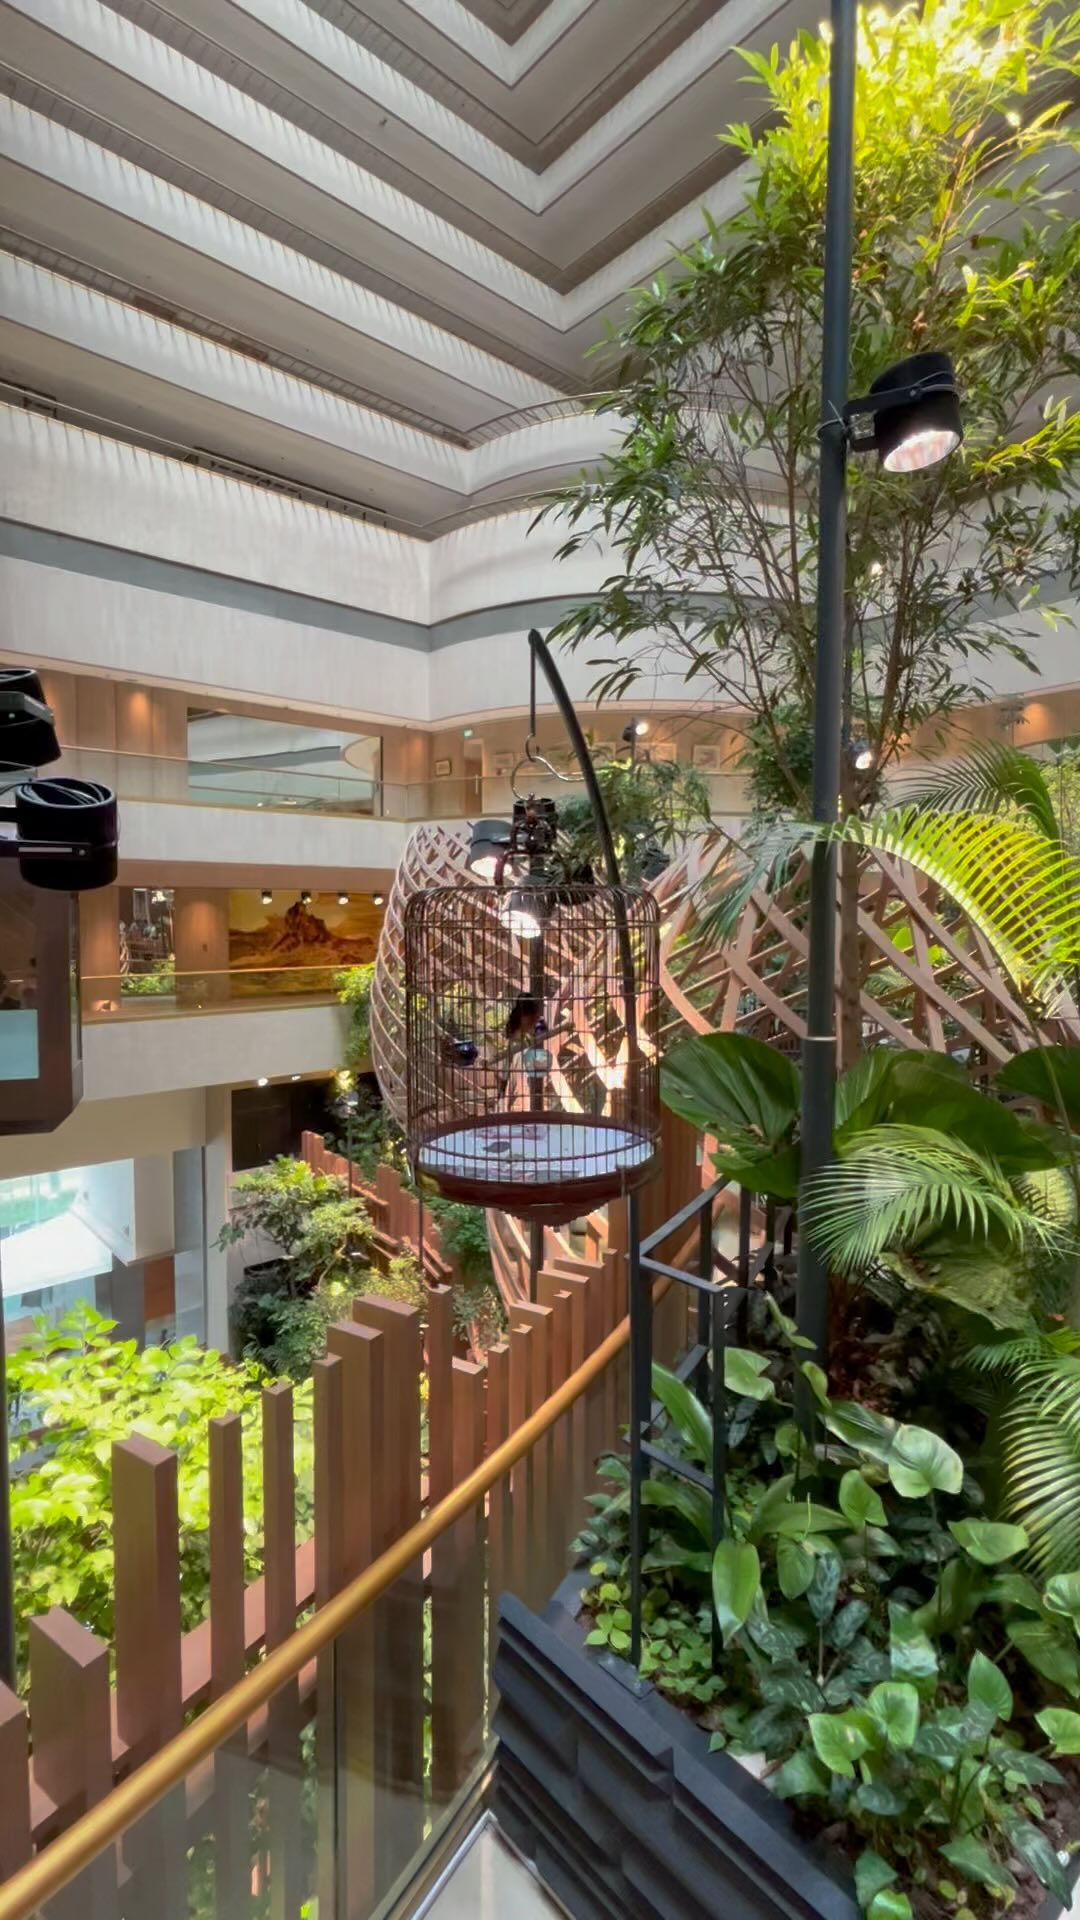 Birdsong fills the urban oasis that is the lobby of the Parkroyal Collection at Singapore’s Marina Bay. Look out for our review of this stunning hotel next week.